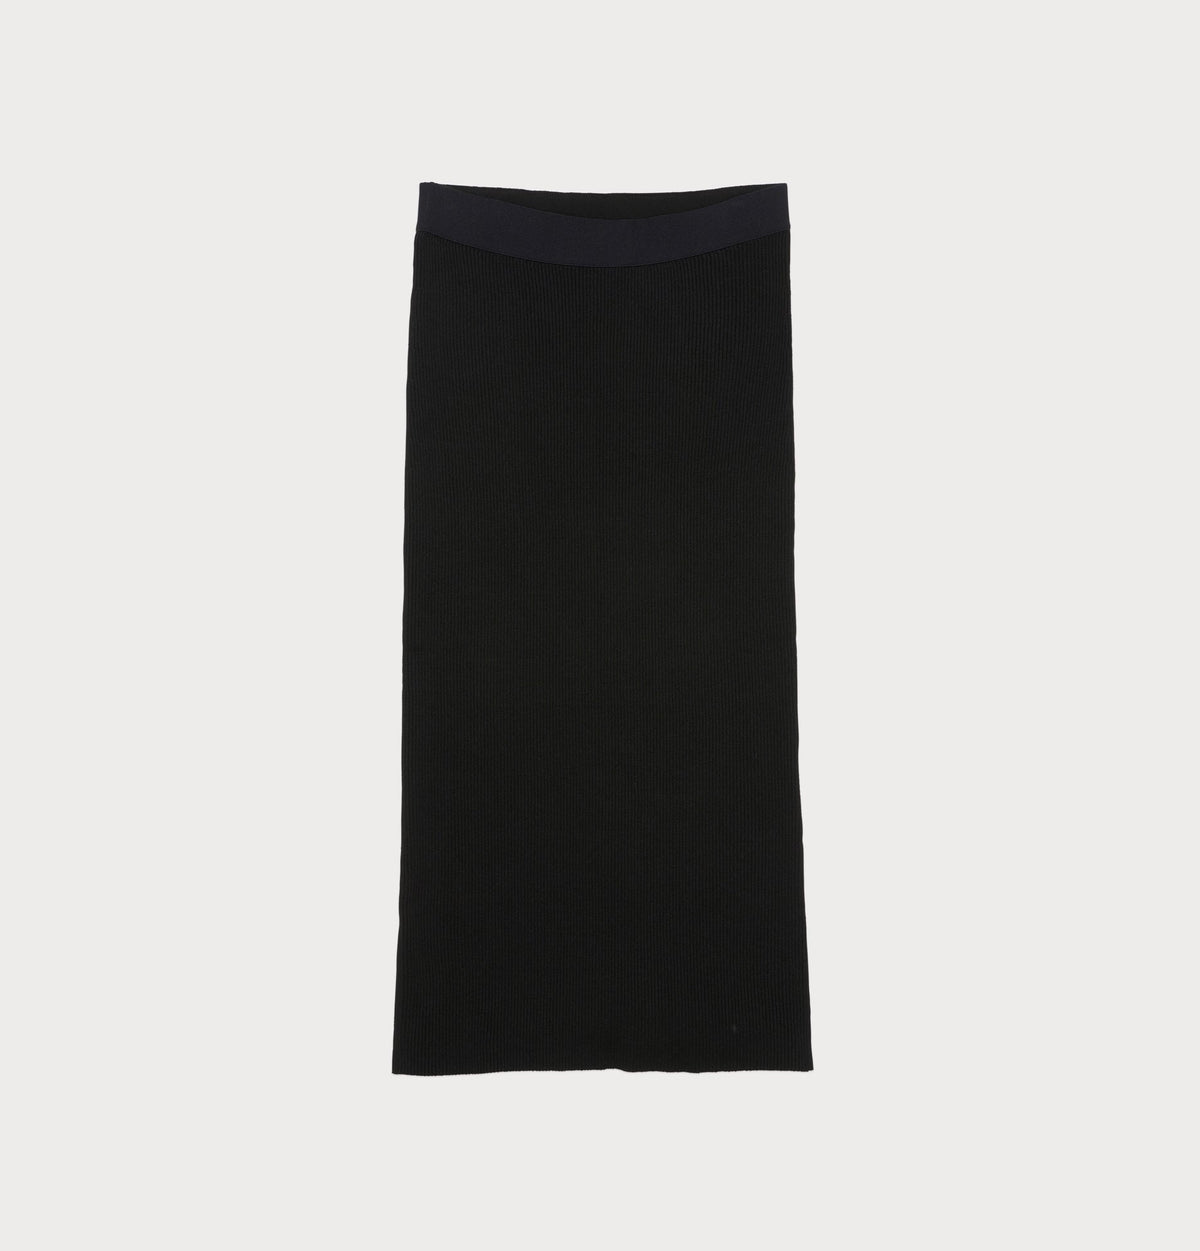 sustainable ribbed knit skirt in black